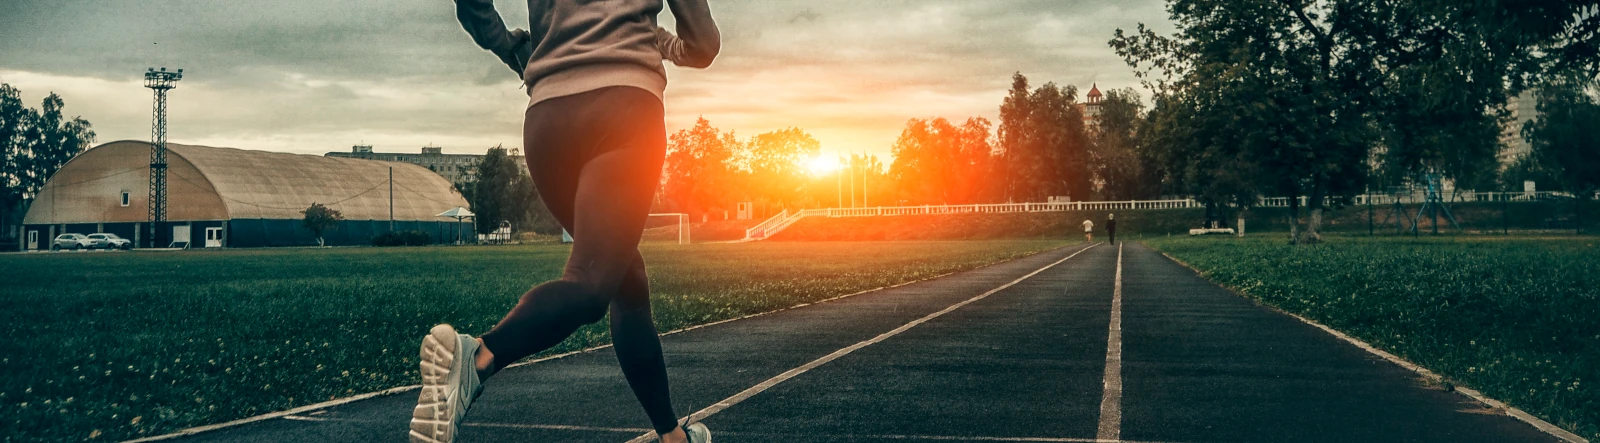 A woman running on a track with the sun rising or setting in the background